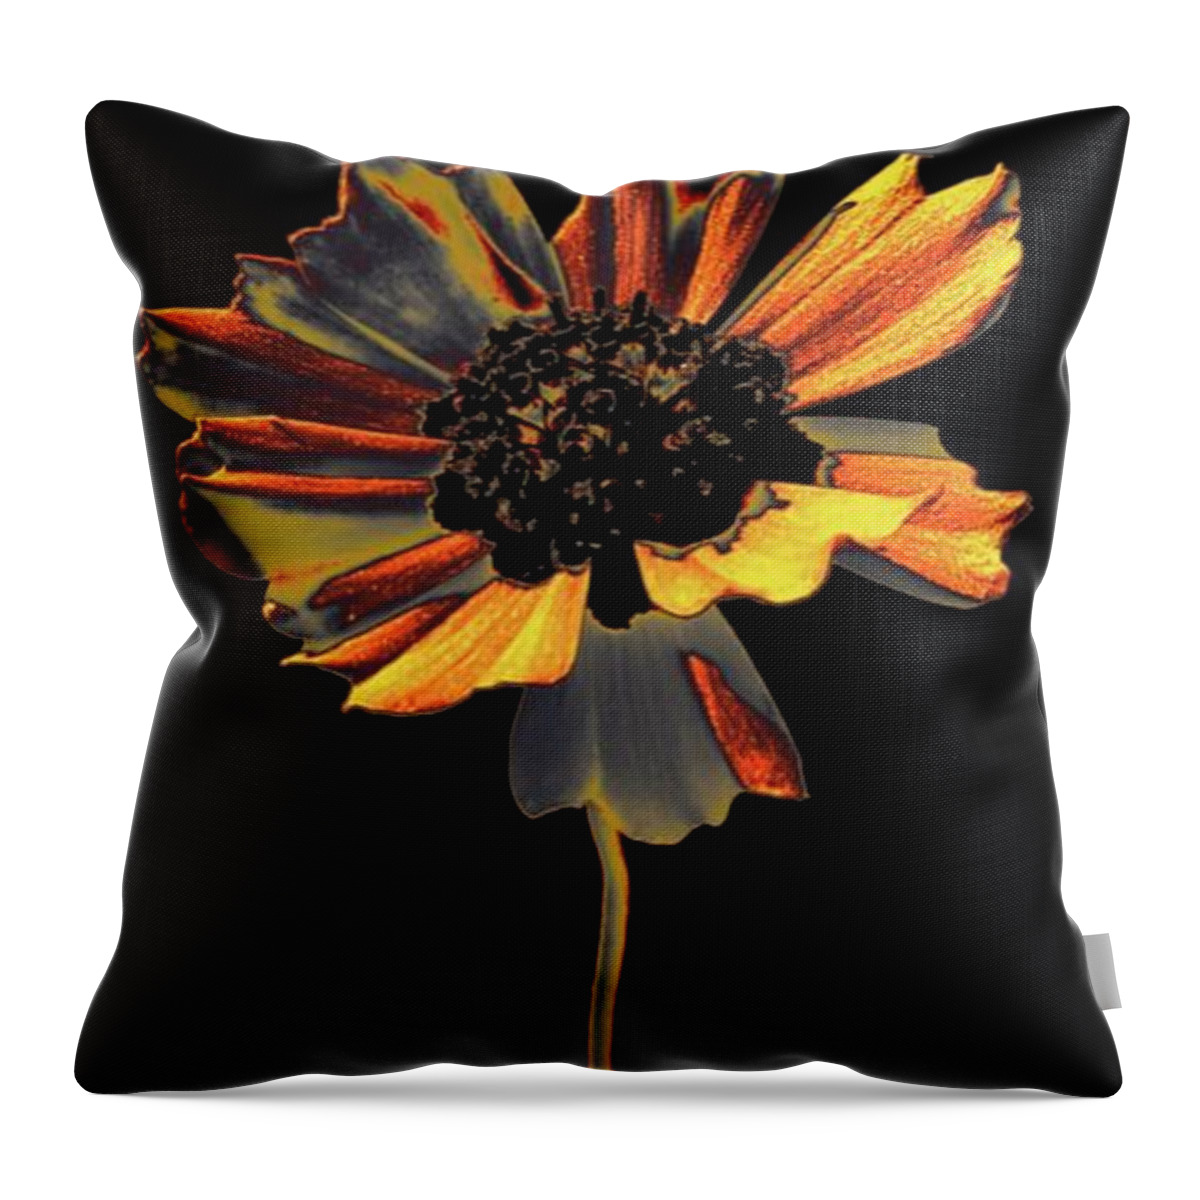 Flower Throw Pillow featuring the photograph Uniquely Solo by Dani McEvoy